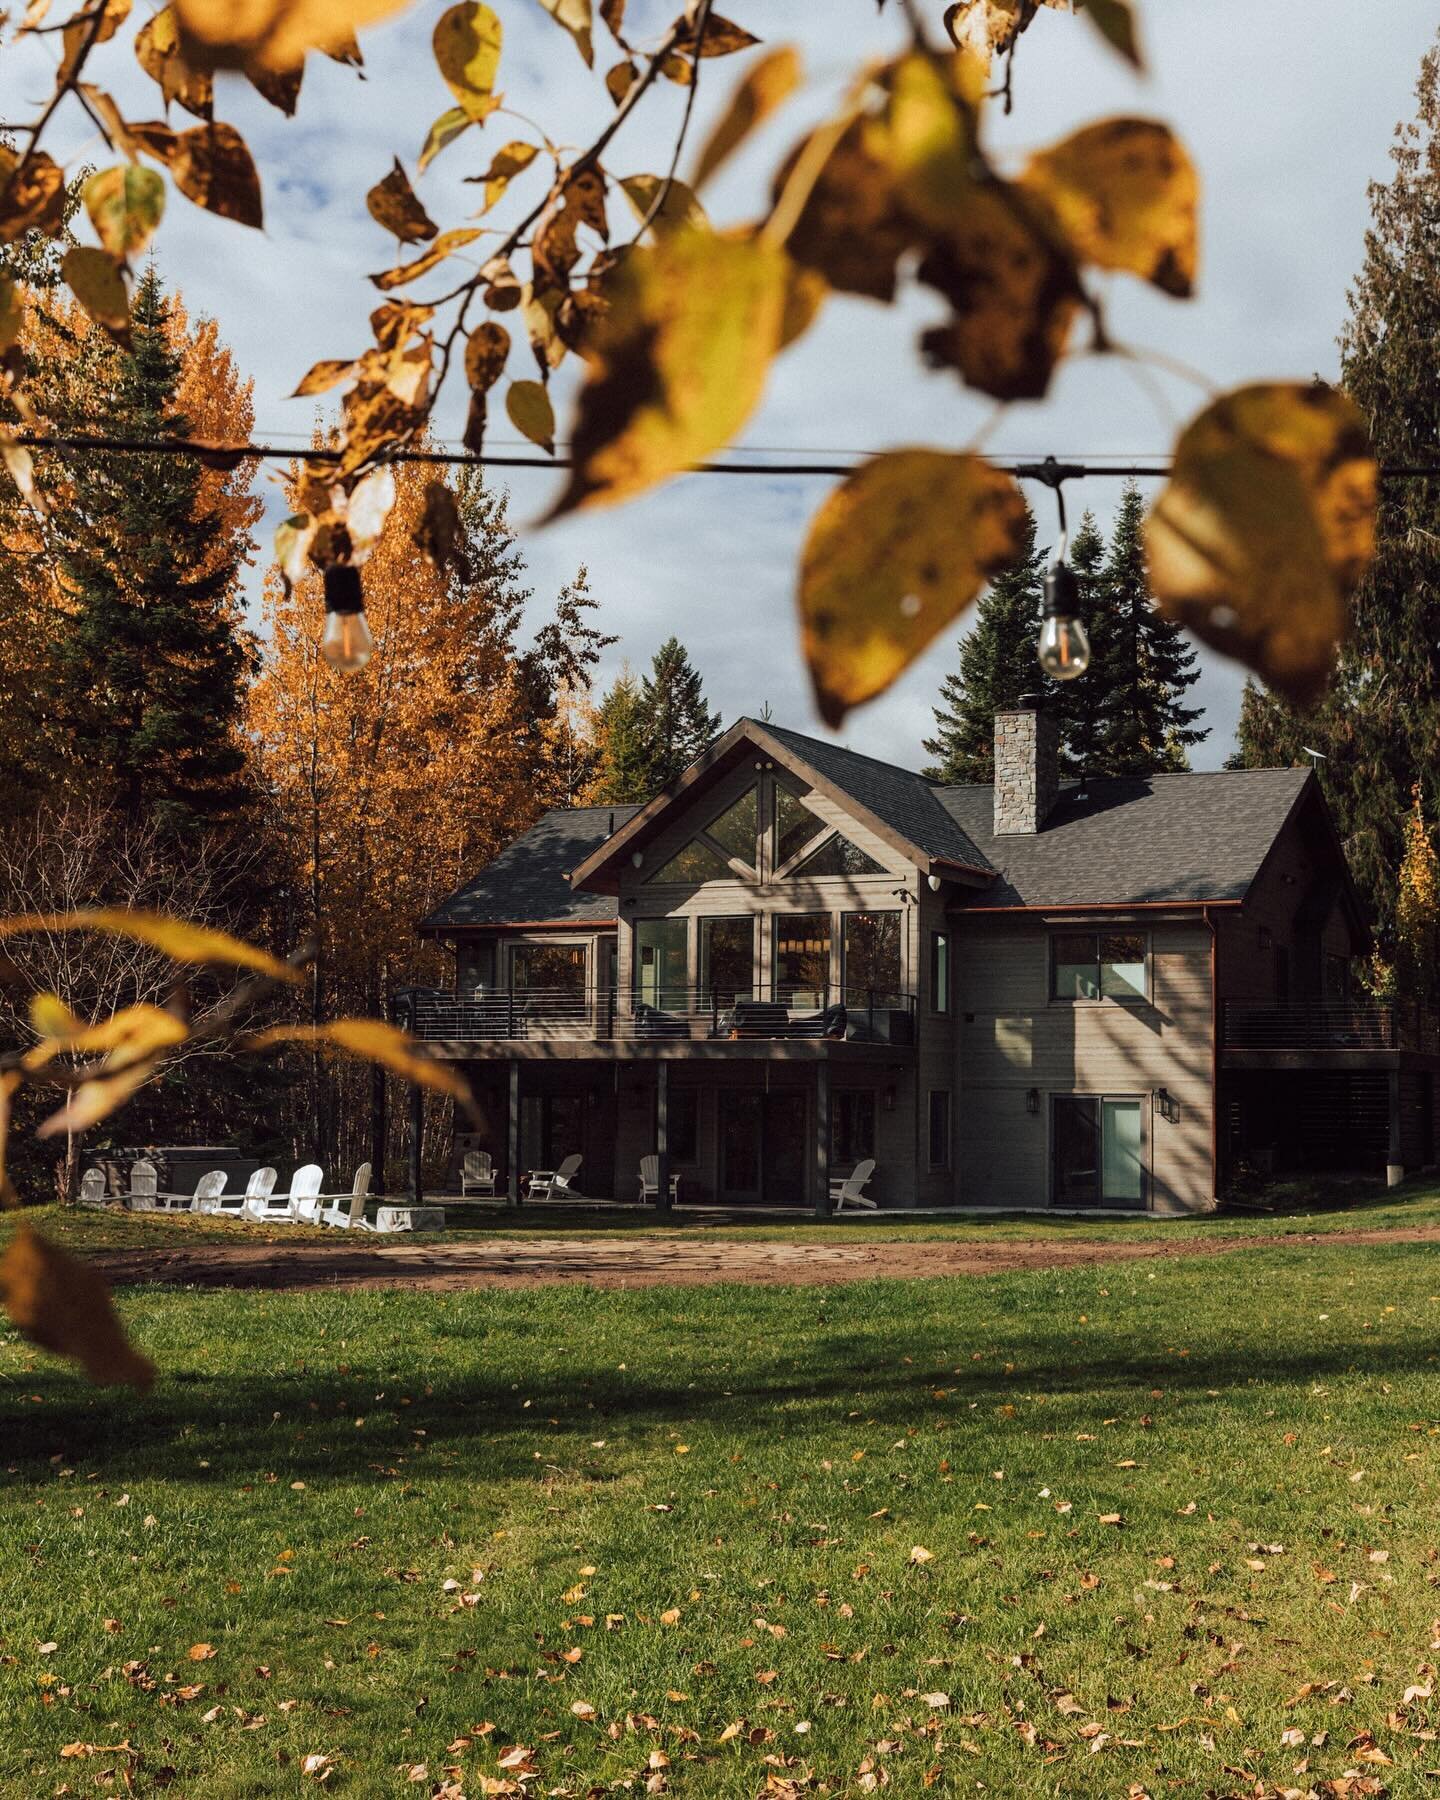 You gotta love fall and what a perfect month it&rsquo;s been.  While everyone loves a good powder day or a day on the lake, the shoulder seasons are something special! Come visit
#whitefishmontana #whitefish #vacation #vacationrental #foliage